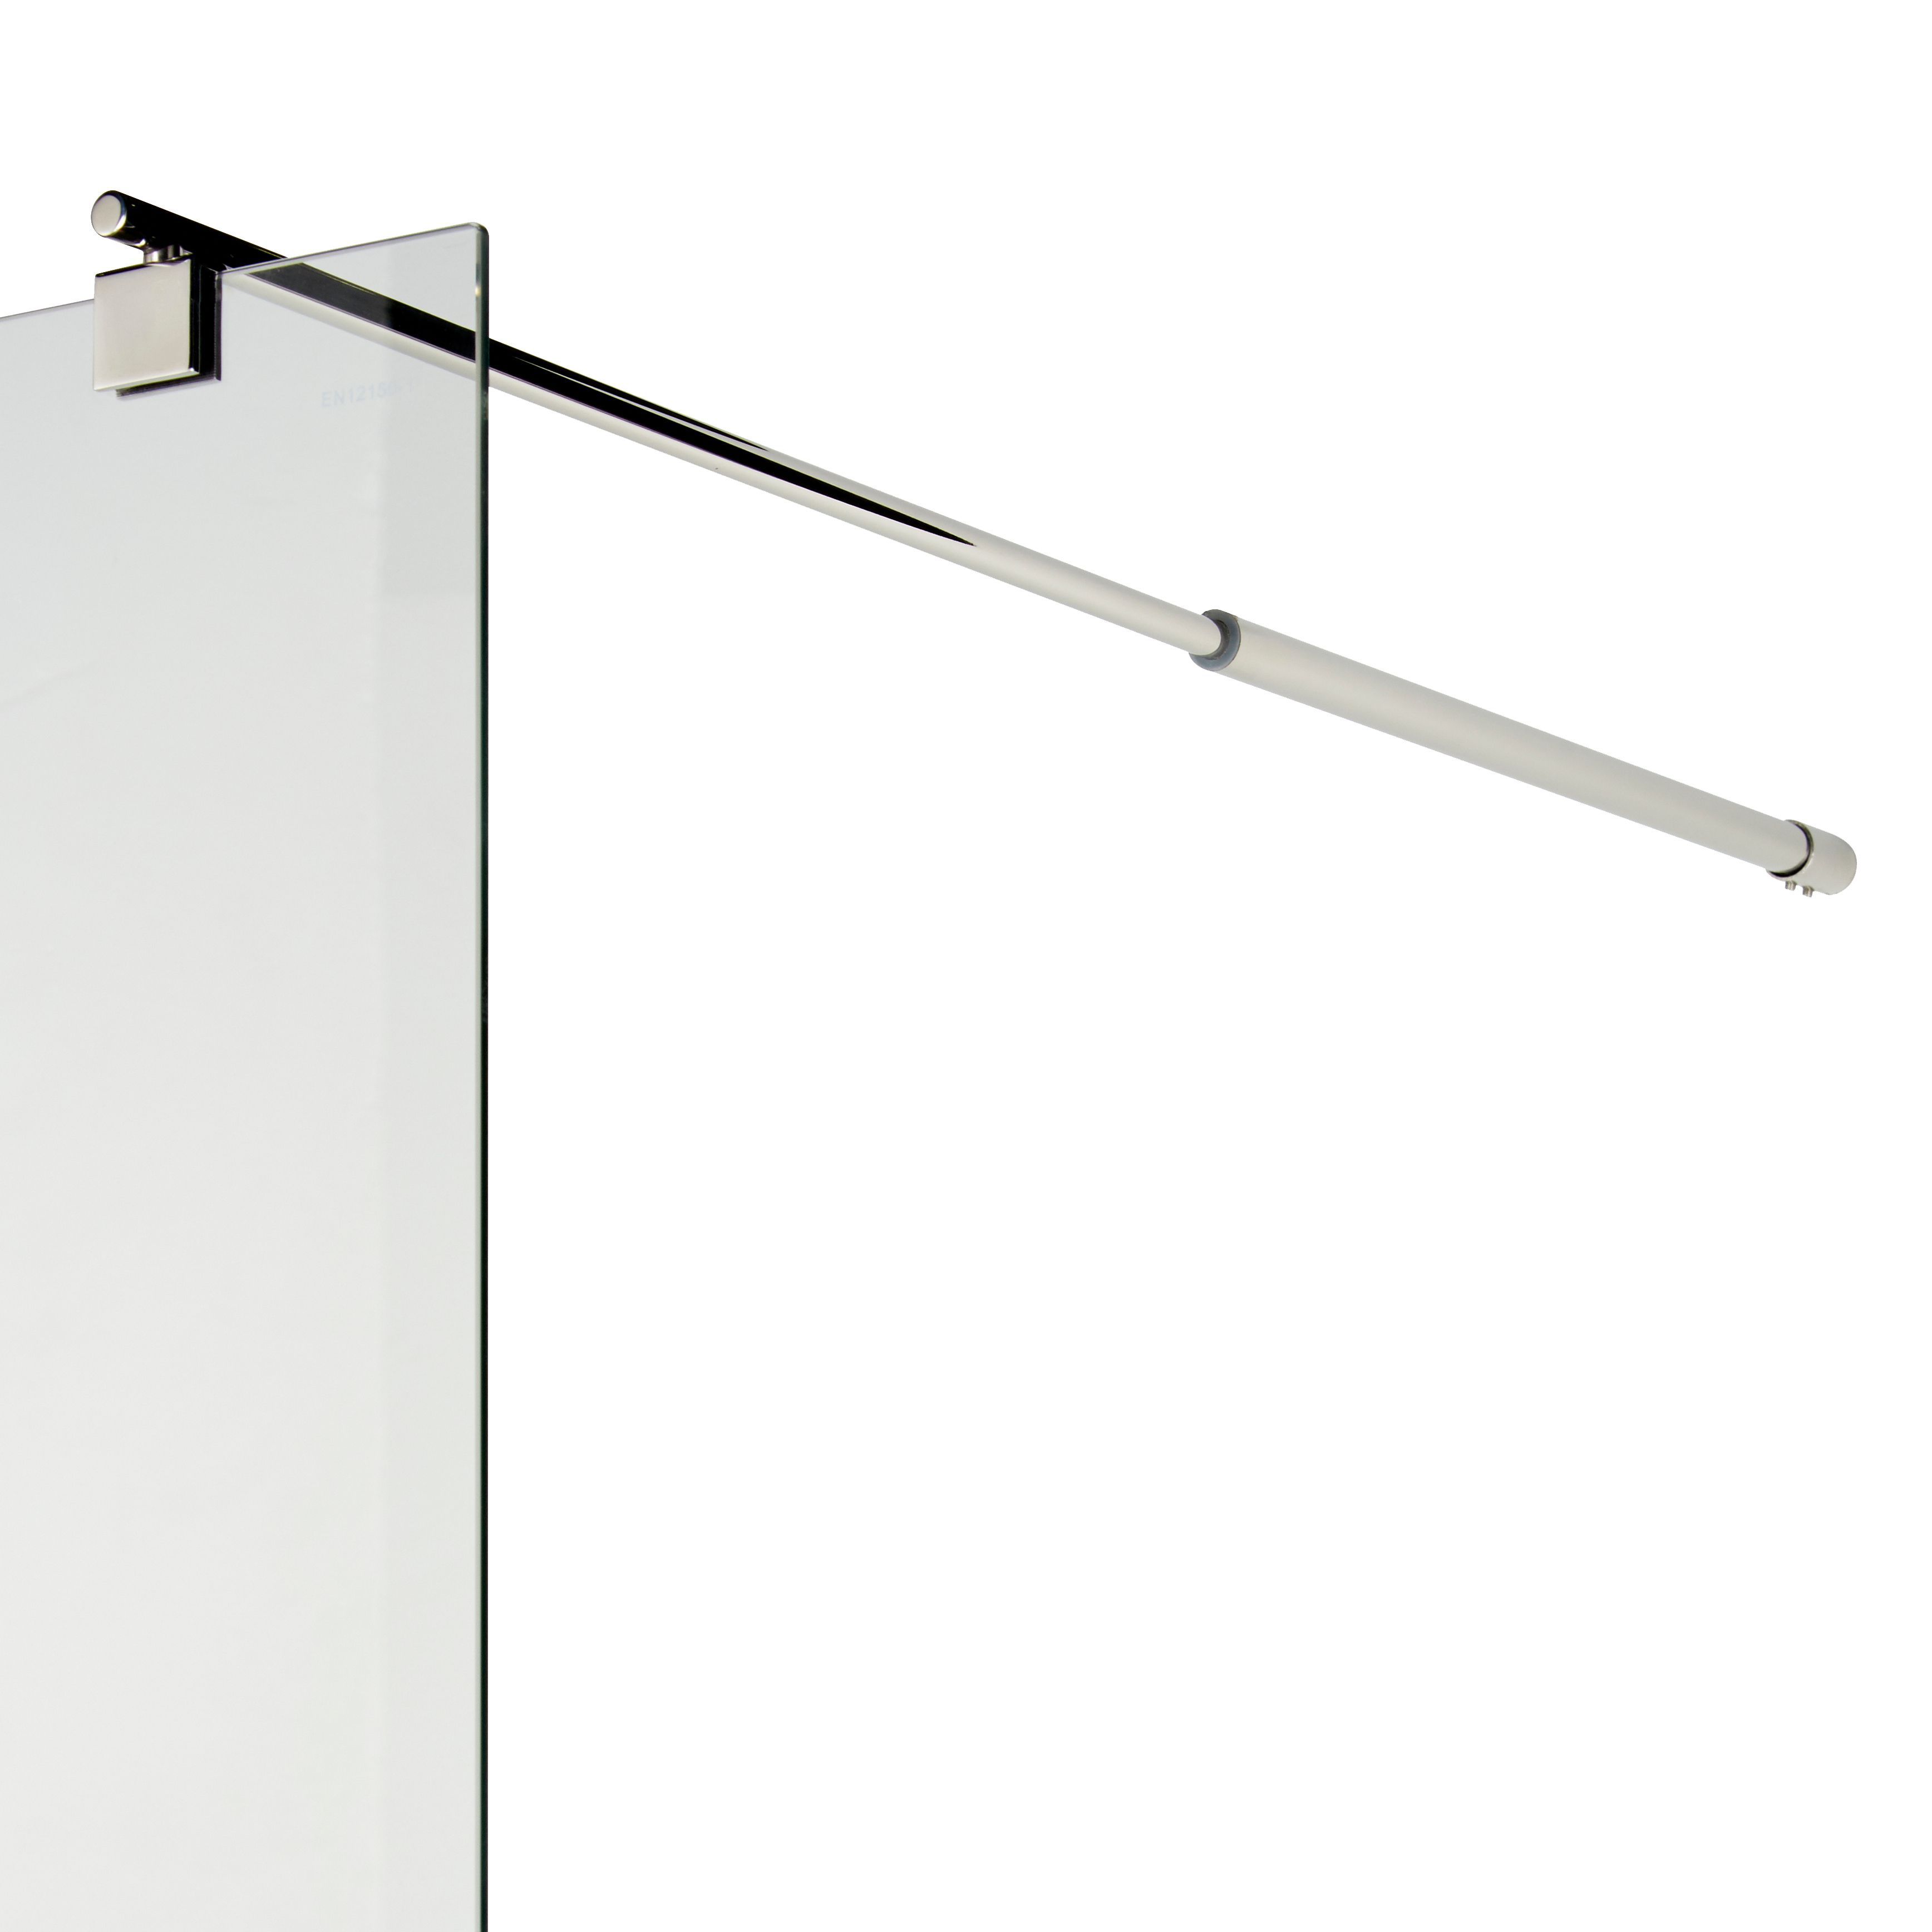 Cooke & Lewis Onega Chrome effect Frosted Striped Walk-in Wet room glass screen & bar (H)195cm (W)90cm